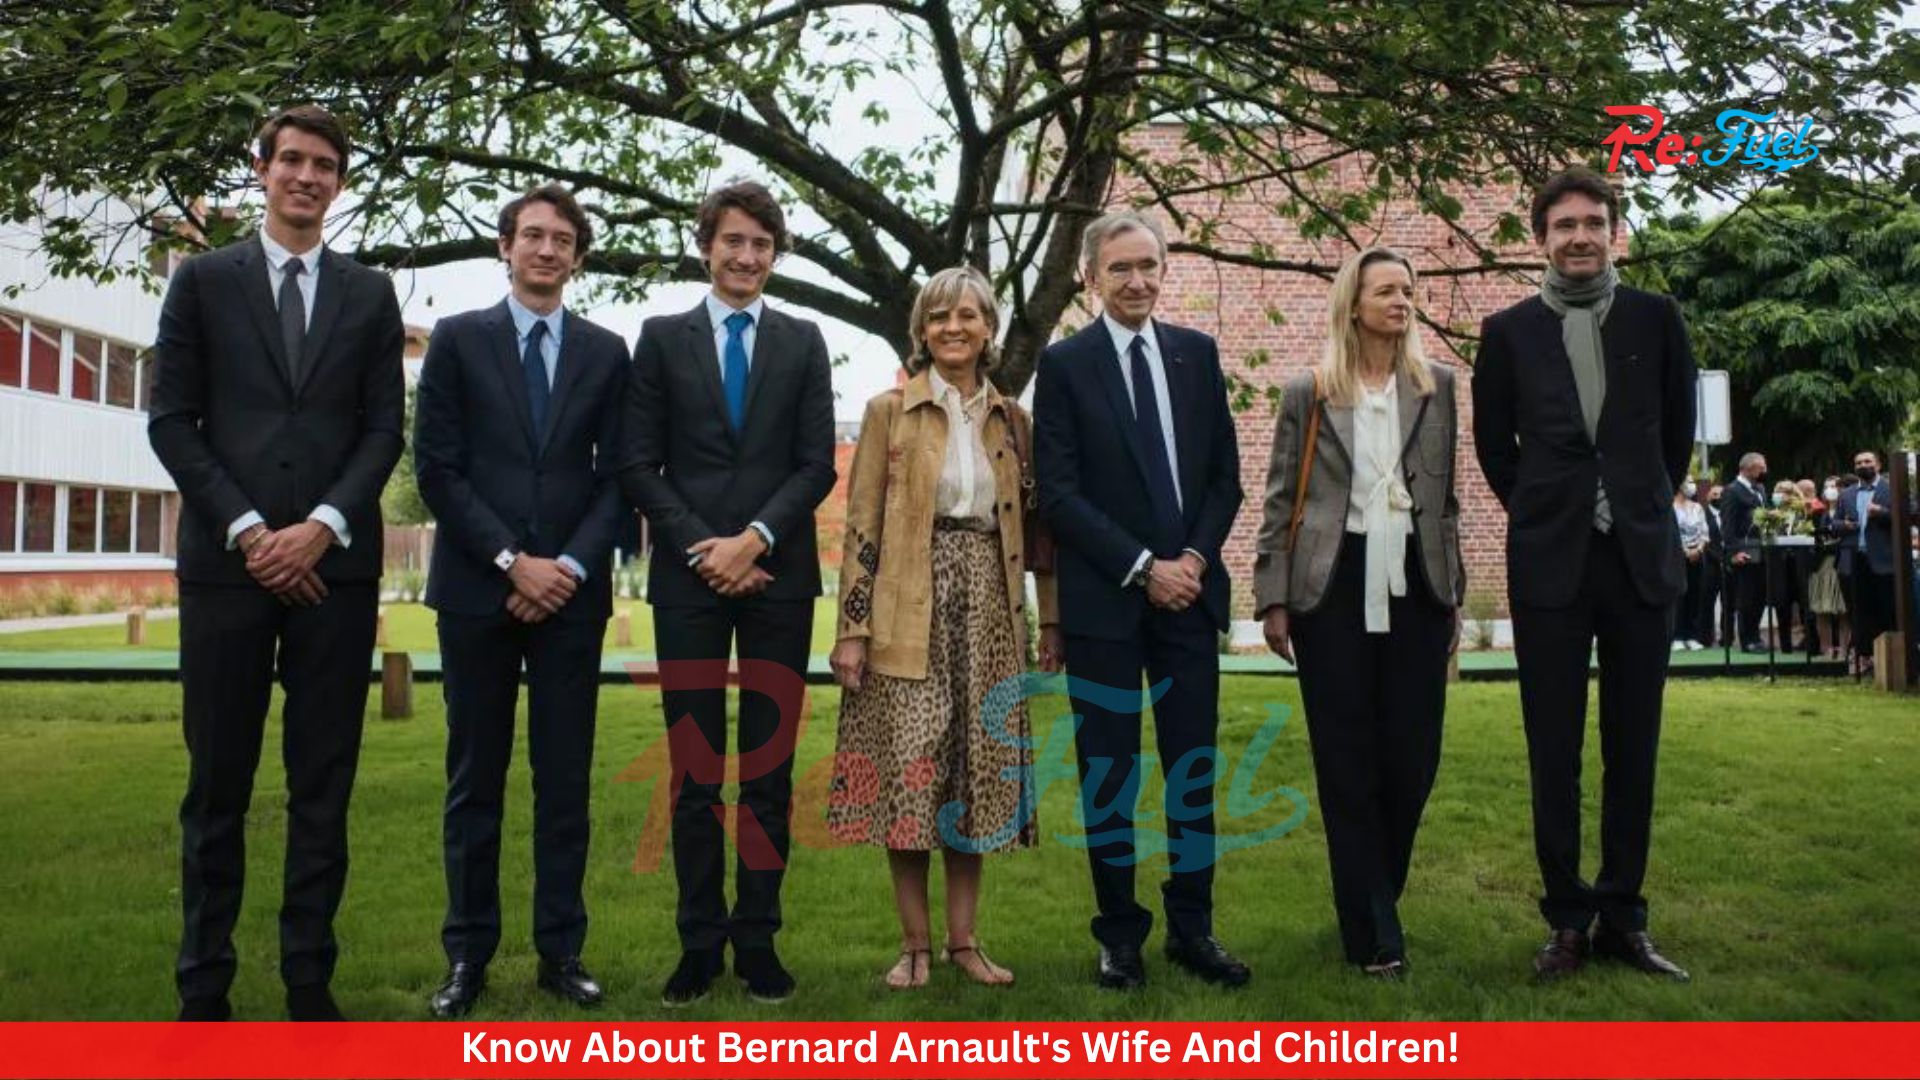 Know About Bernard Arnault's Wife And Children!